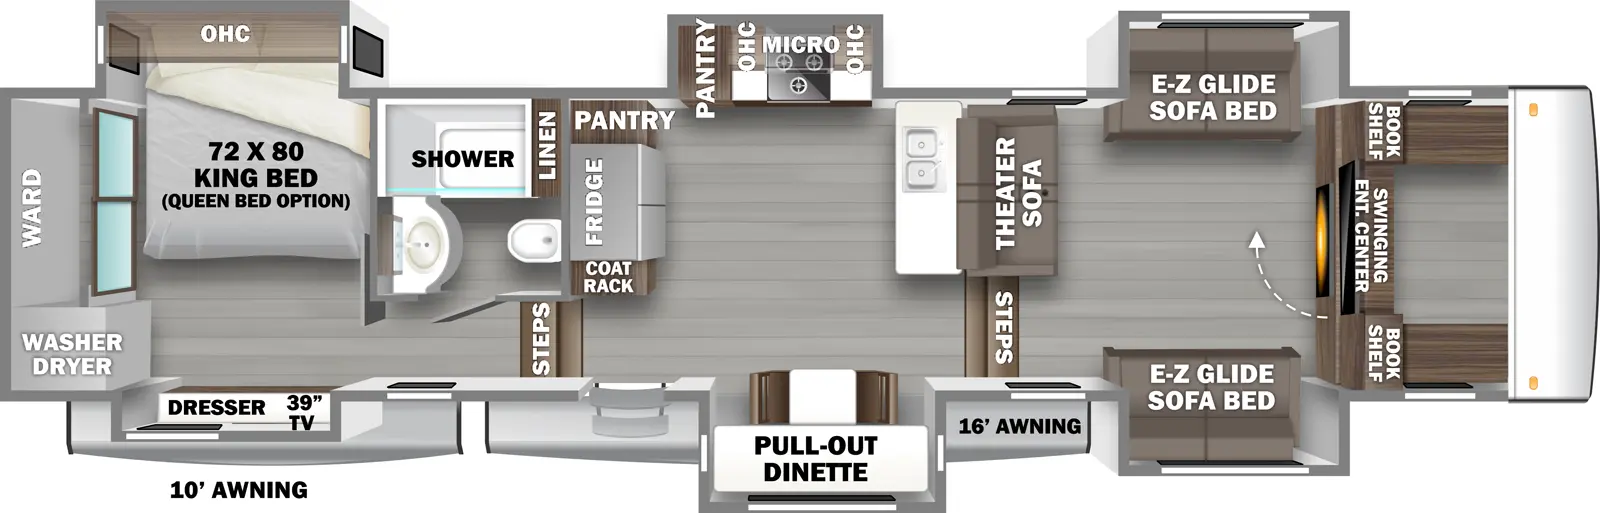 The 425FO has 6 slideouts and one entry. Exterior features a 10 foot awning and 16 foot awning. Interior layout front to back: swinging entertainment center with book shelves on each side, opposing e-z glide sofa bed slideouts, and theater sofa along inner wall; steps down to kitchen area; counter with sink along inner wall, off-door side slideout with cooktop, microwave, overhead cabinet and pantry, door side slideout with pull-out dinette, entry, and coat rack, refrigerator and pantry along inner wall; steps up to rear bedroom and bathroom; off-door side full bathroom with linen closet; rear bedroom with off-door side king bed (optional queen bed) slideout with overhead cabinet, door side slideout with dresser and TV, and rear wardrobe with washer and dryer.